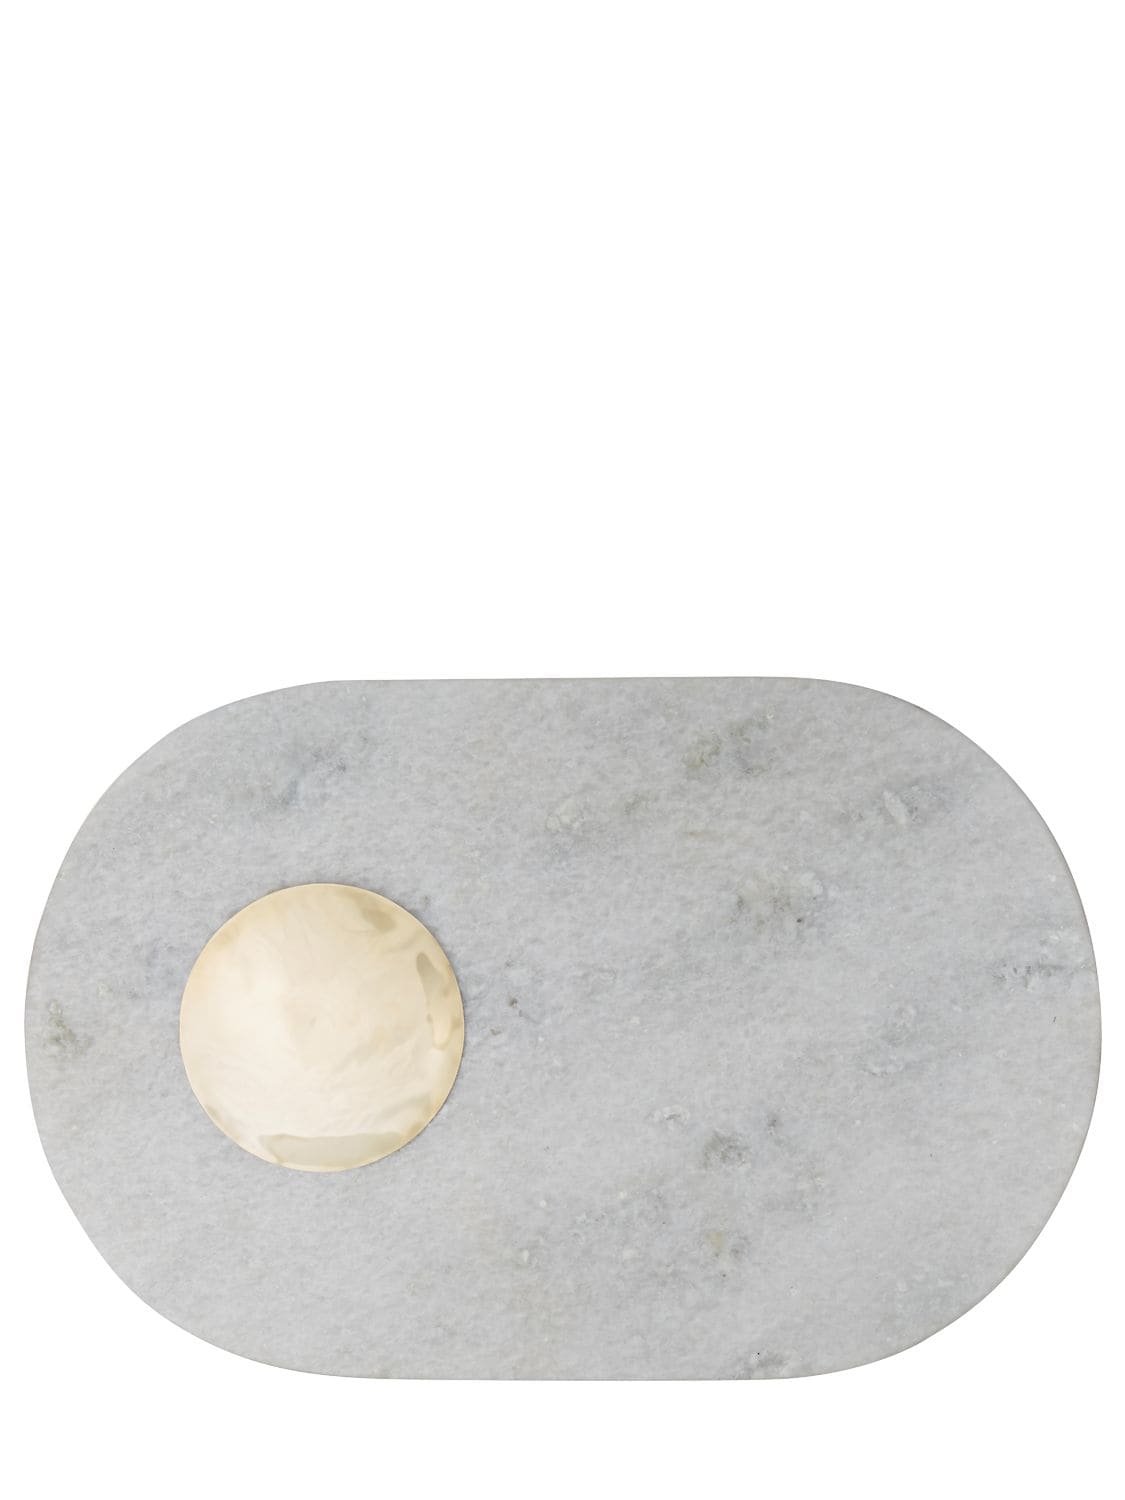 Image of Marble Chopping Board